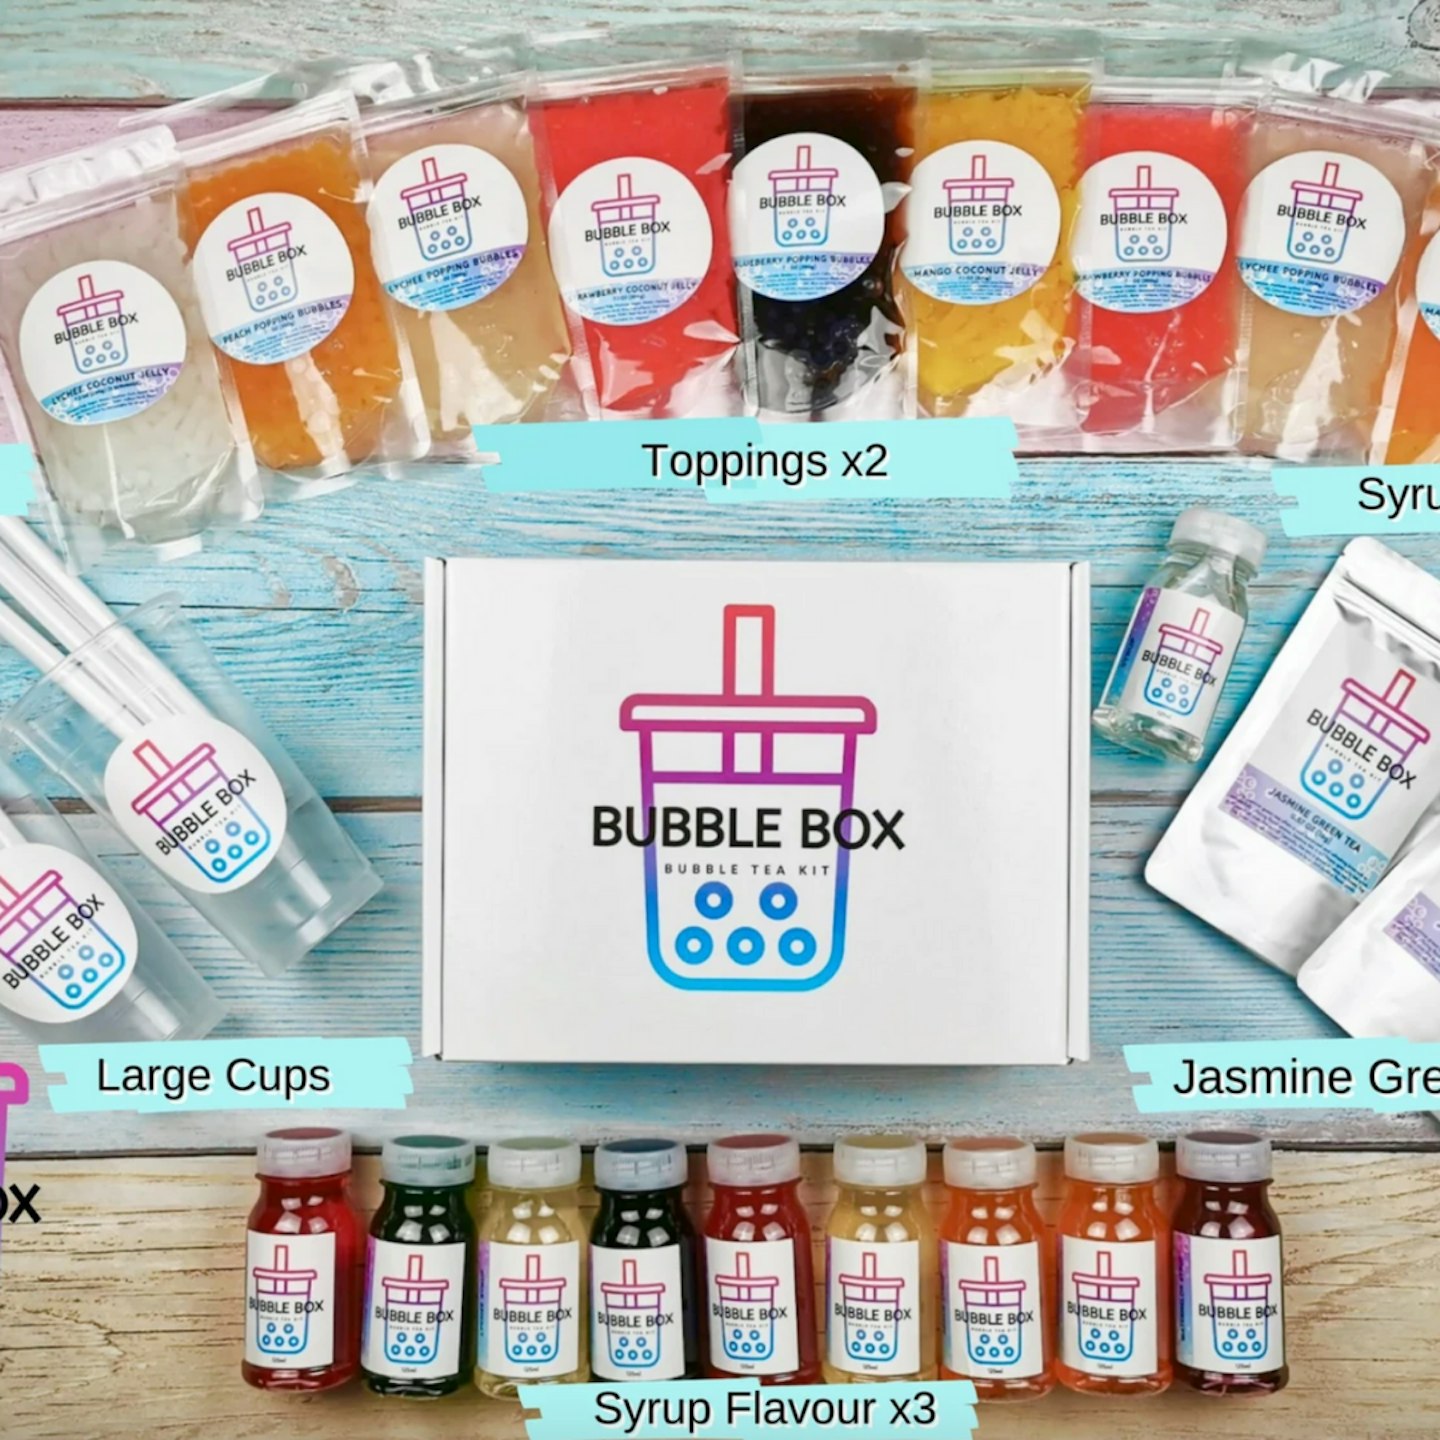 Small Bubble Tea Party Kit – THE TEASHED